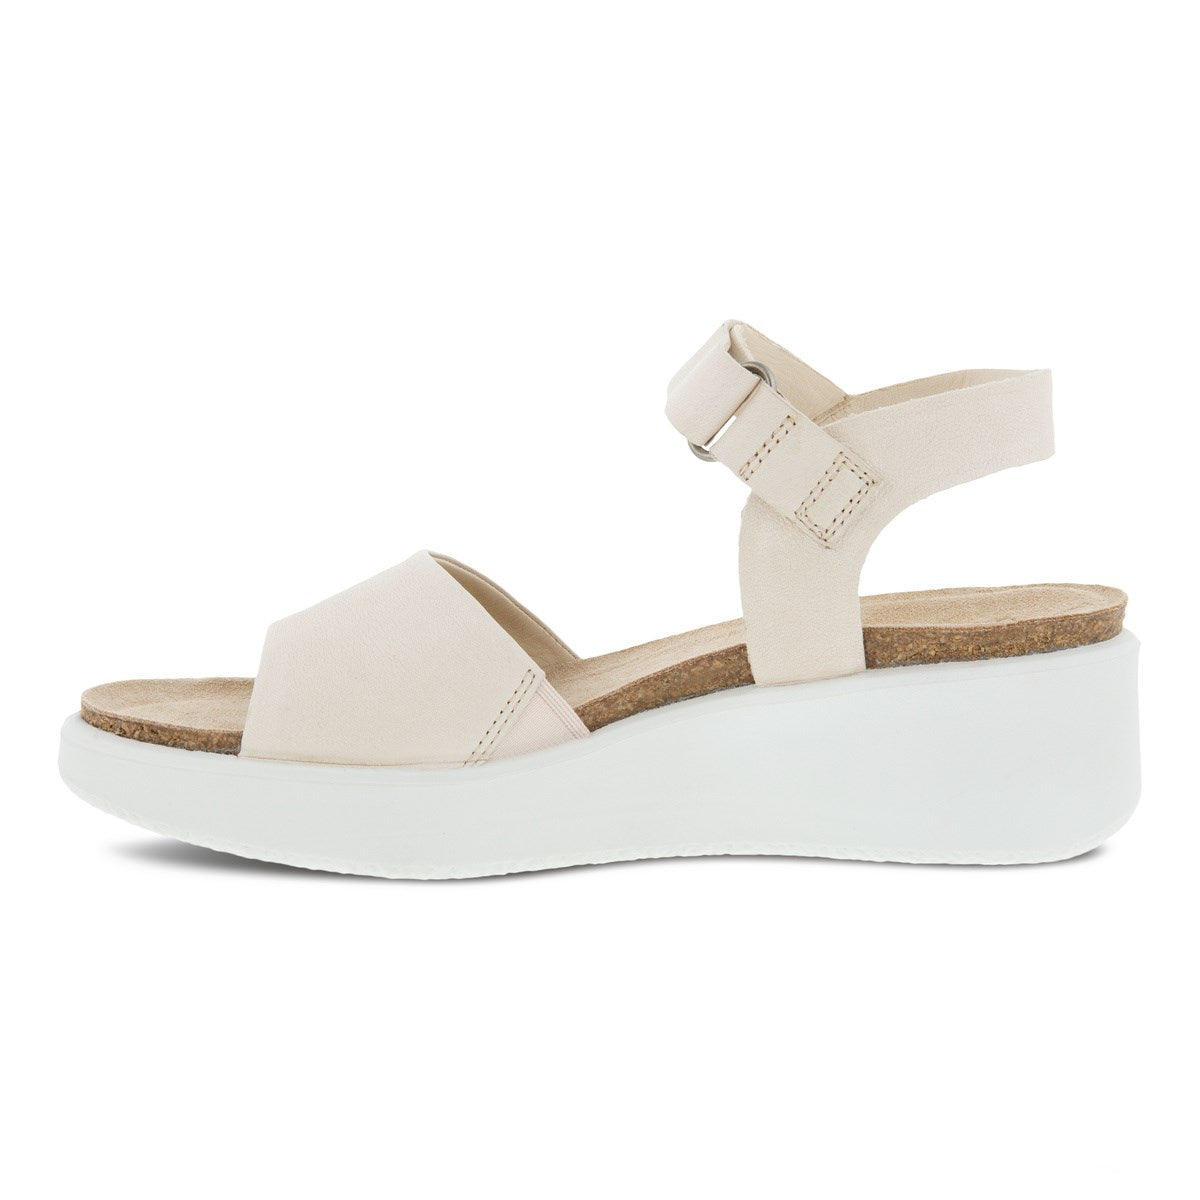 ECCO FLOWT WEDGE LIMESTONE SPIN - Women Sandals - Collective Shoes 